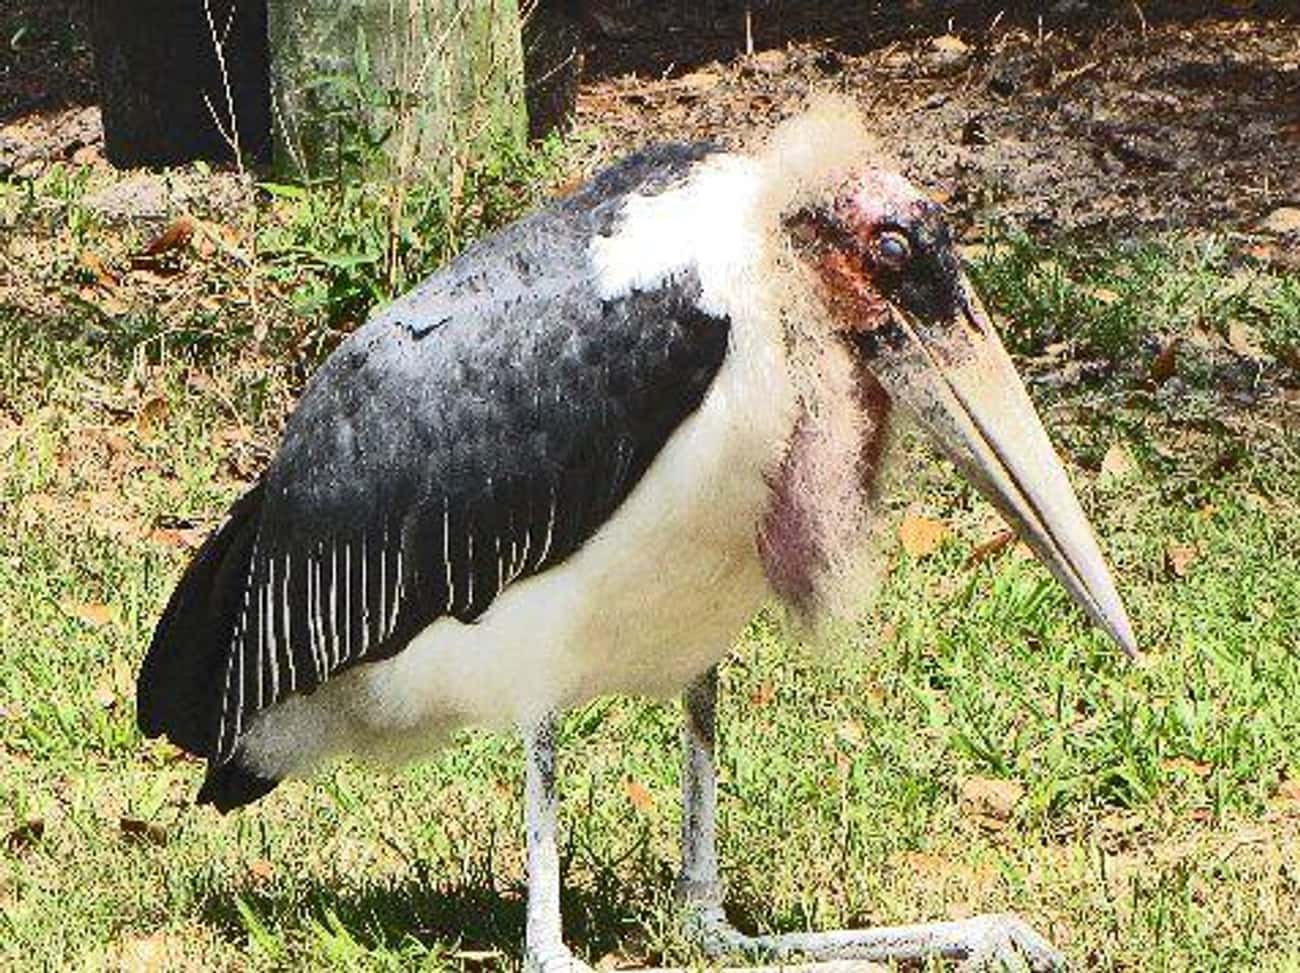 The Marabou Stork Poops All Over Its Own Legs On Purpose